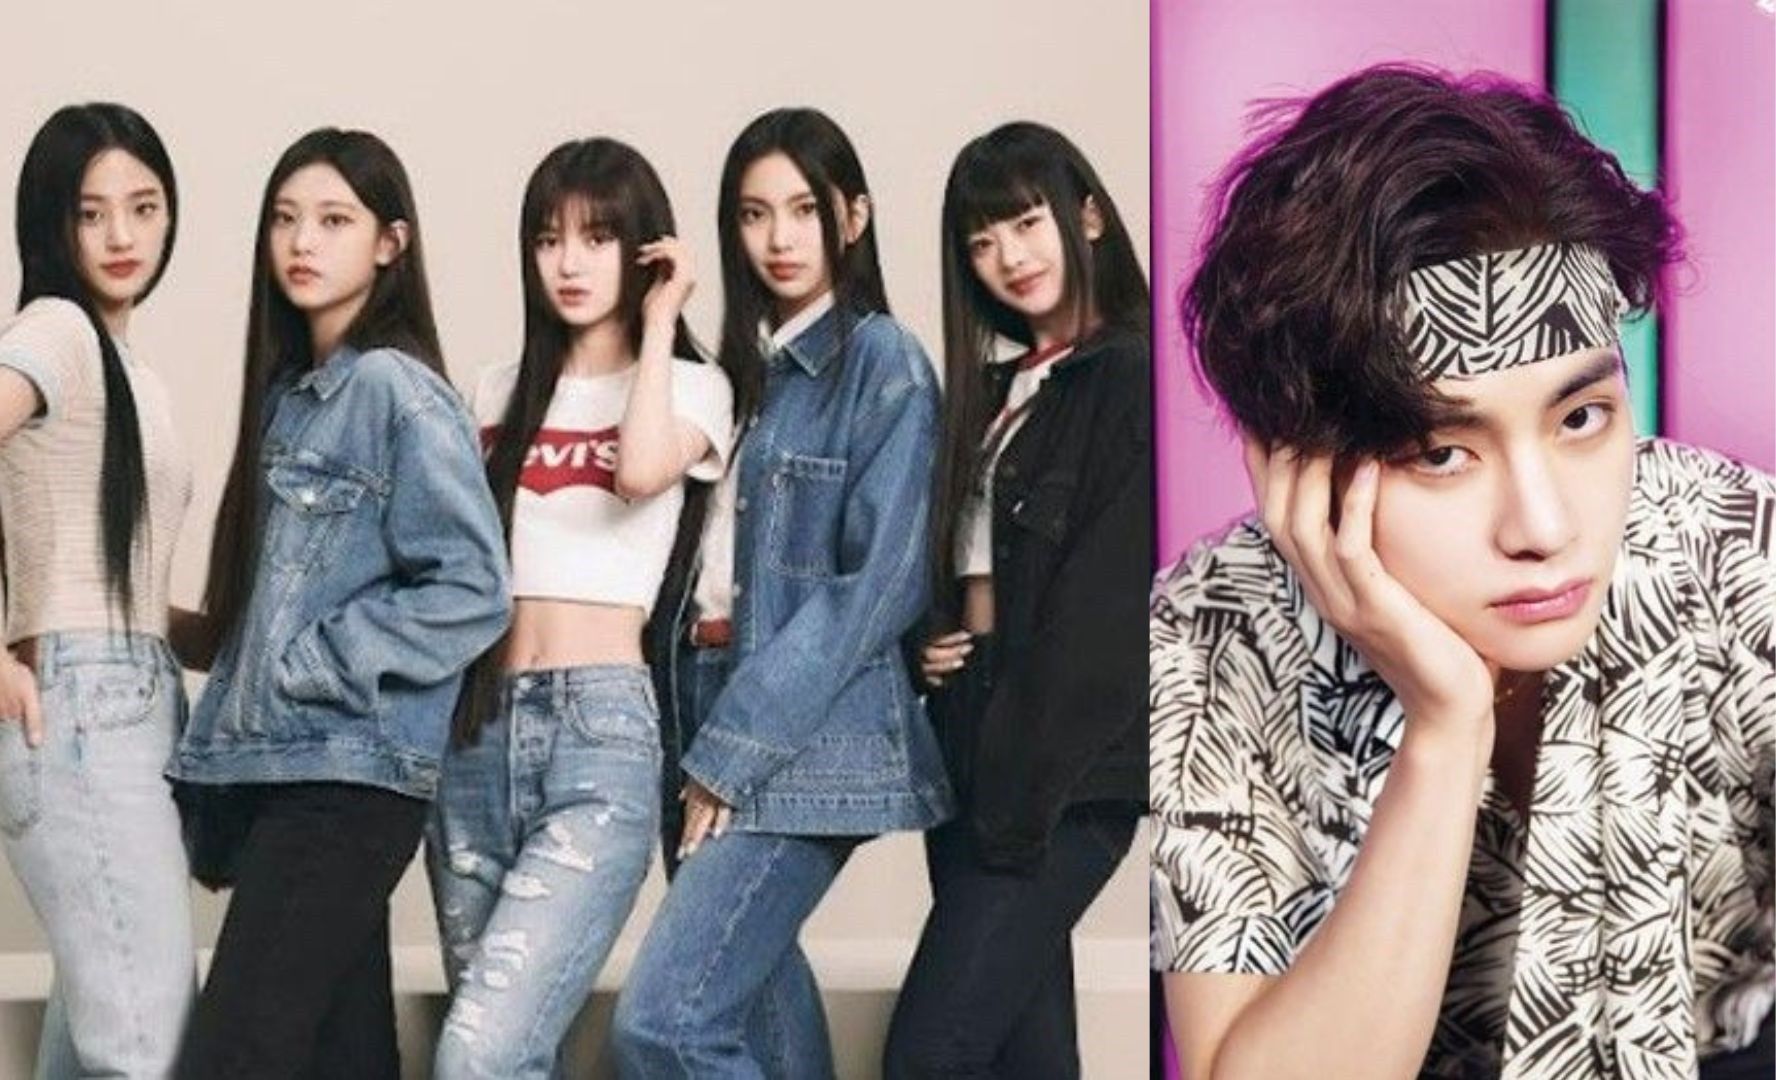 K-pop band New Jeans are the new global ambassadors for Levi's